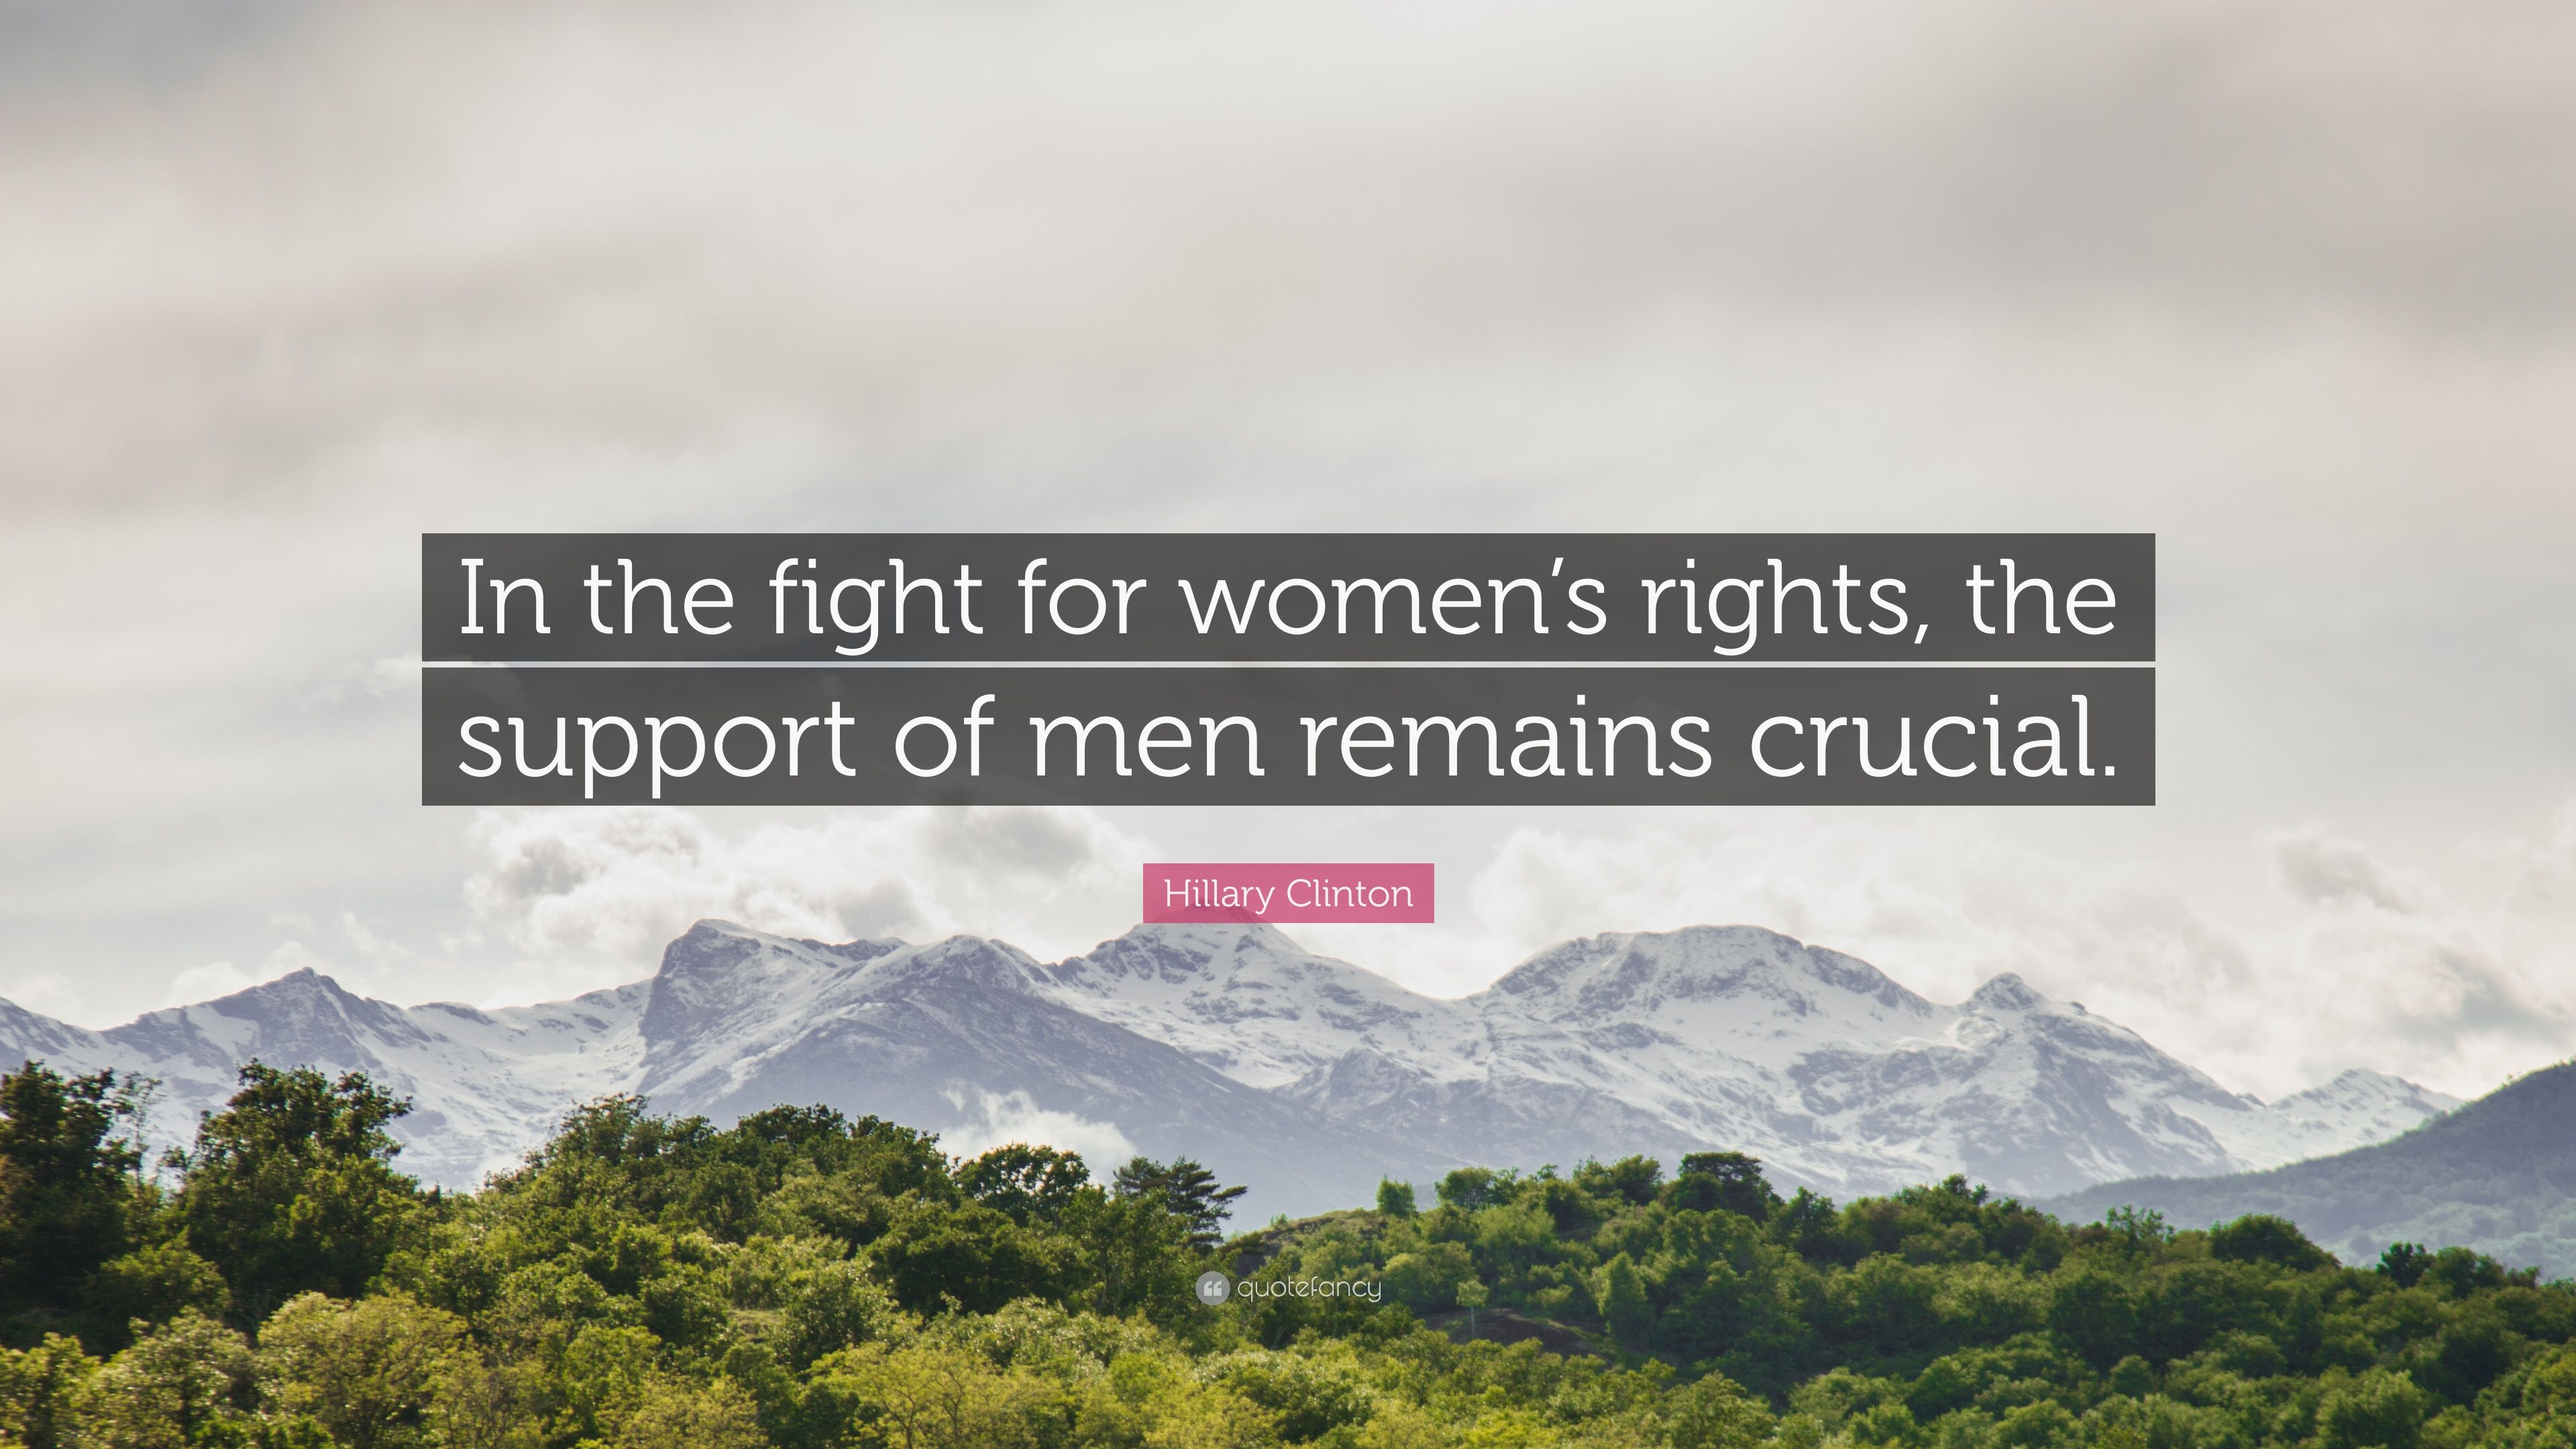 Hillary Clinton Quote: “In the fight for women's rights